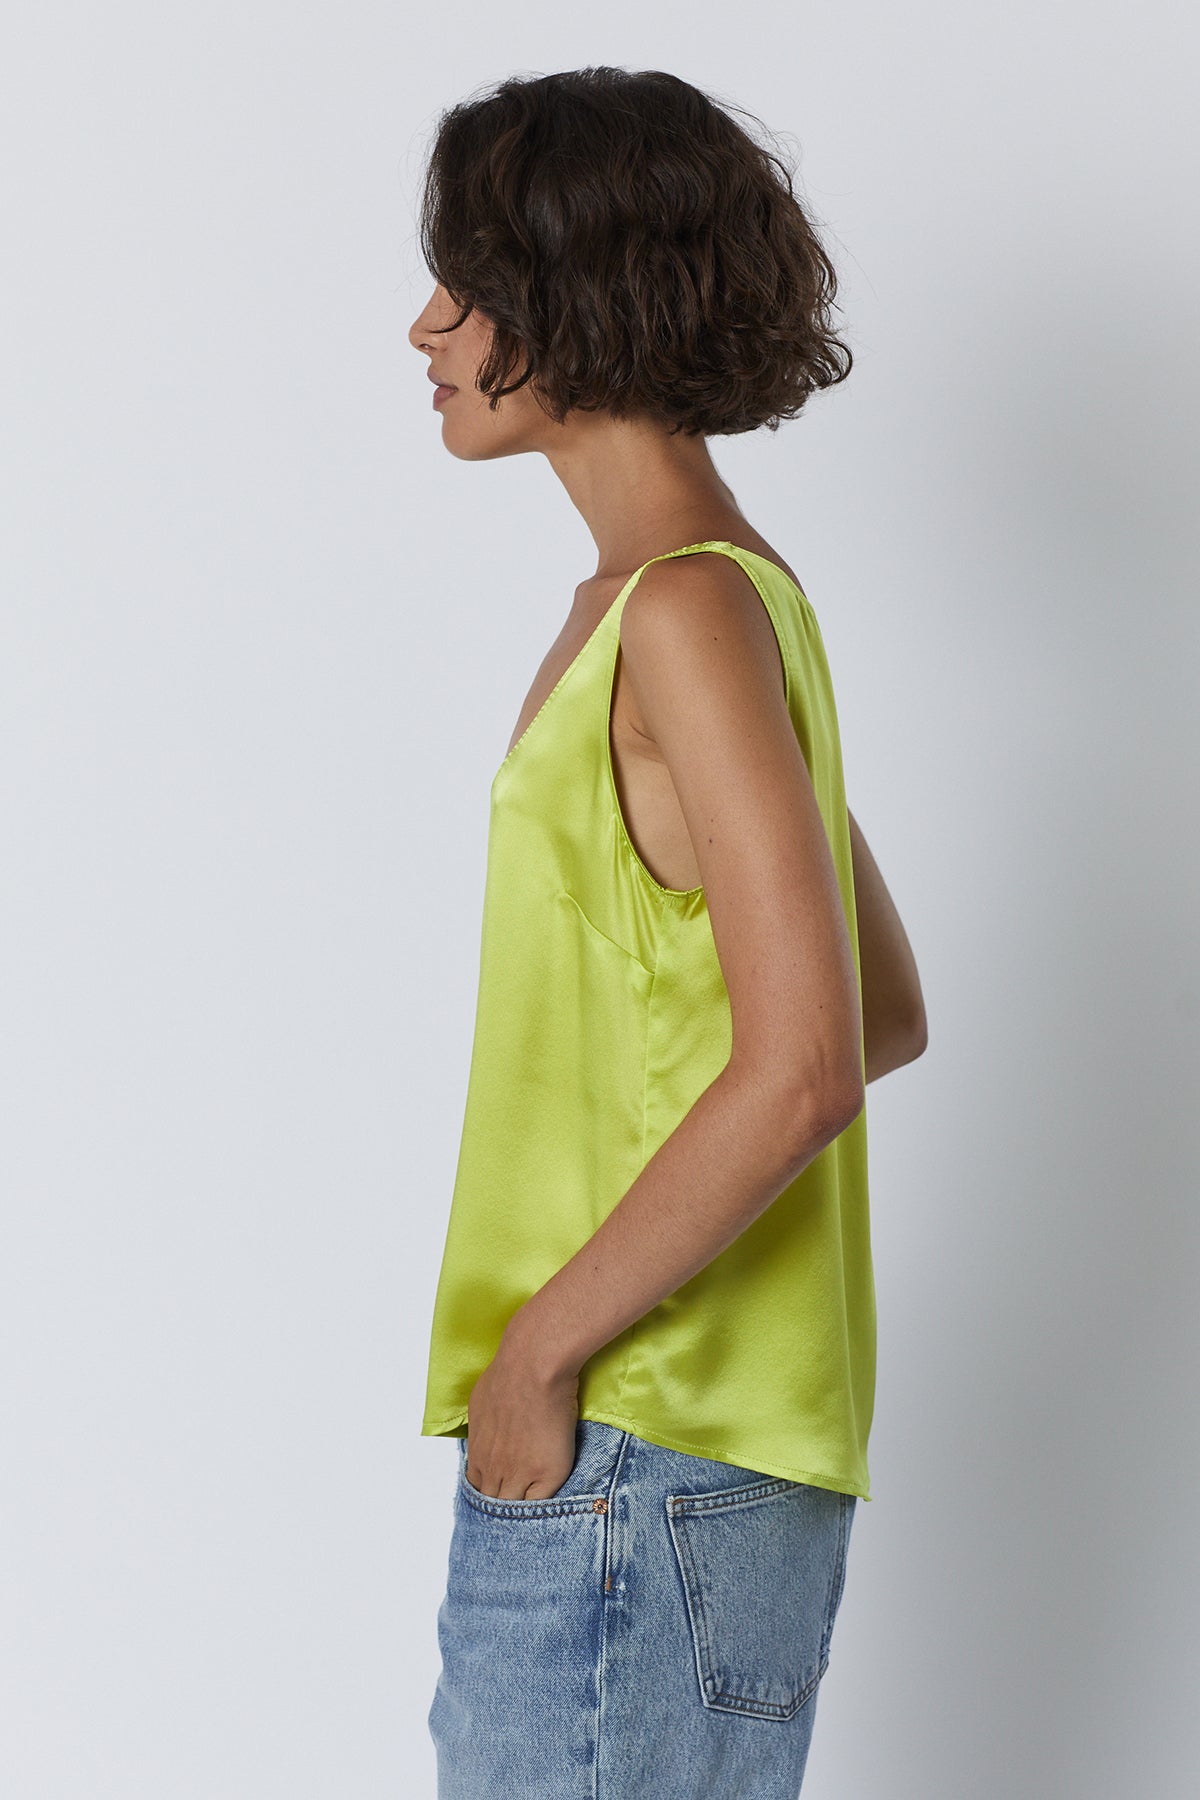 Nolita Tank Top in lime green with blue denim side-26007163568321